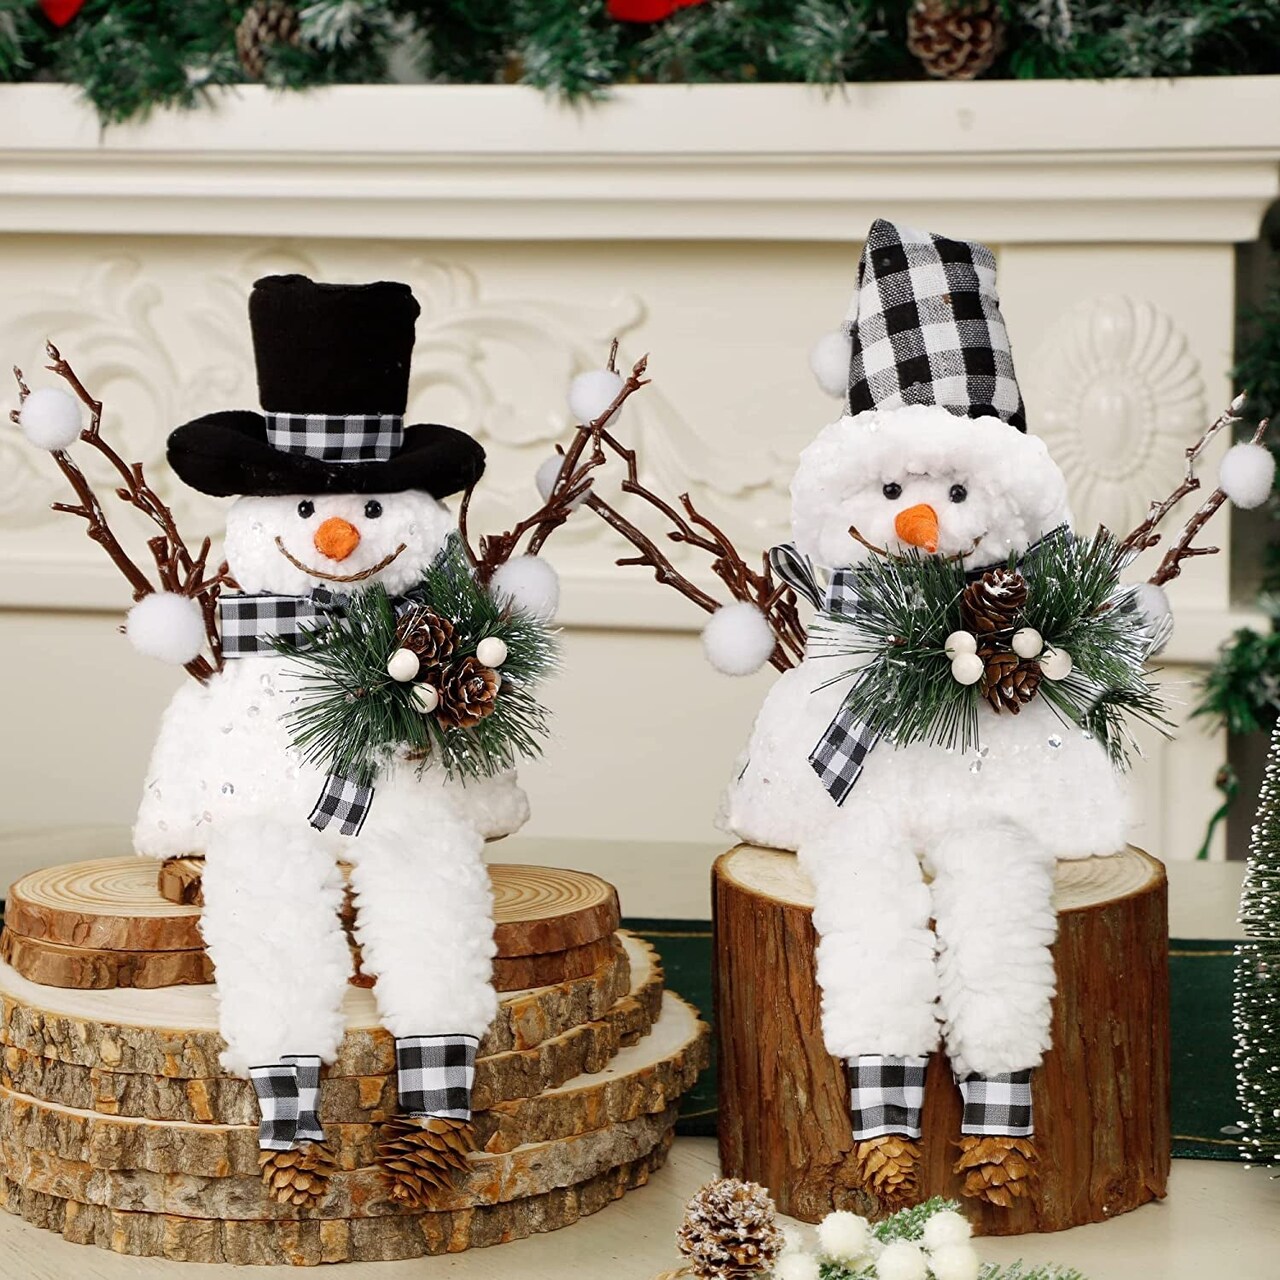 Christmas Snowman Ornaments for Table Mantel Desk Fireplace Home Holiday Decor (Red and Black)